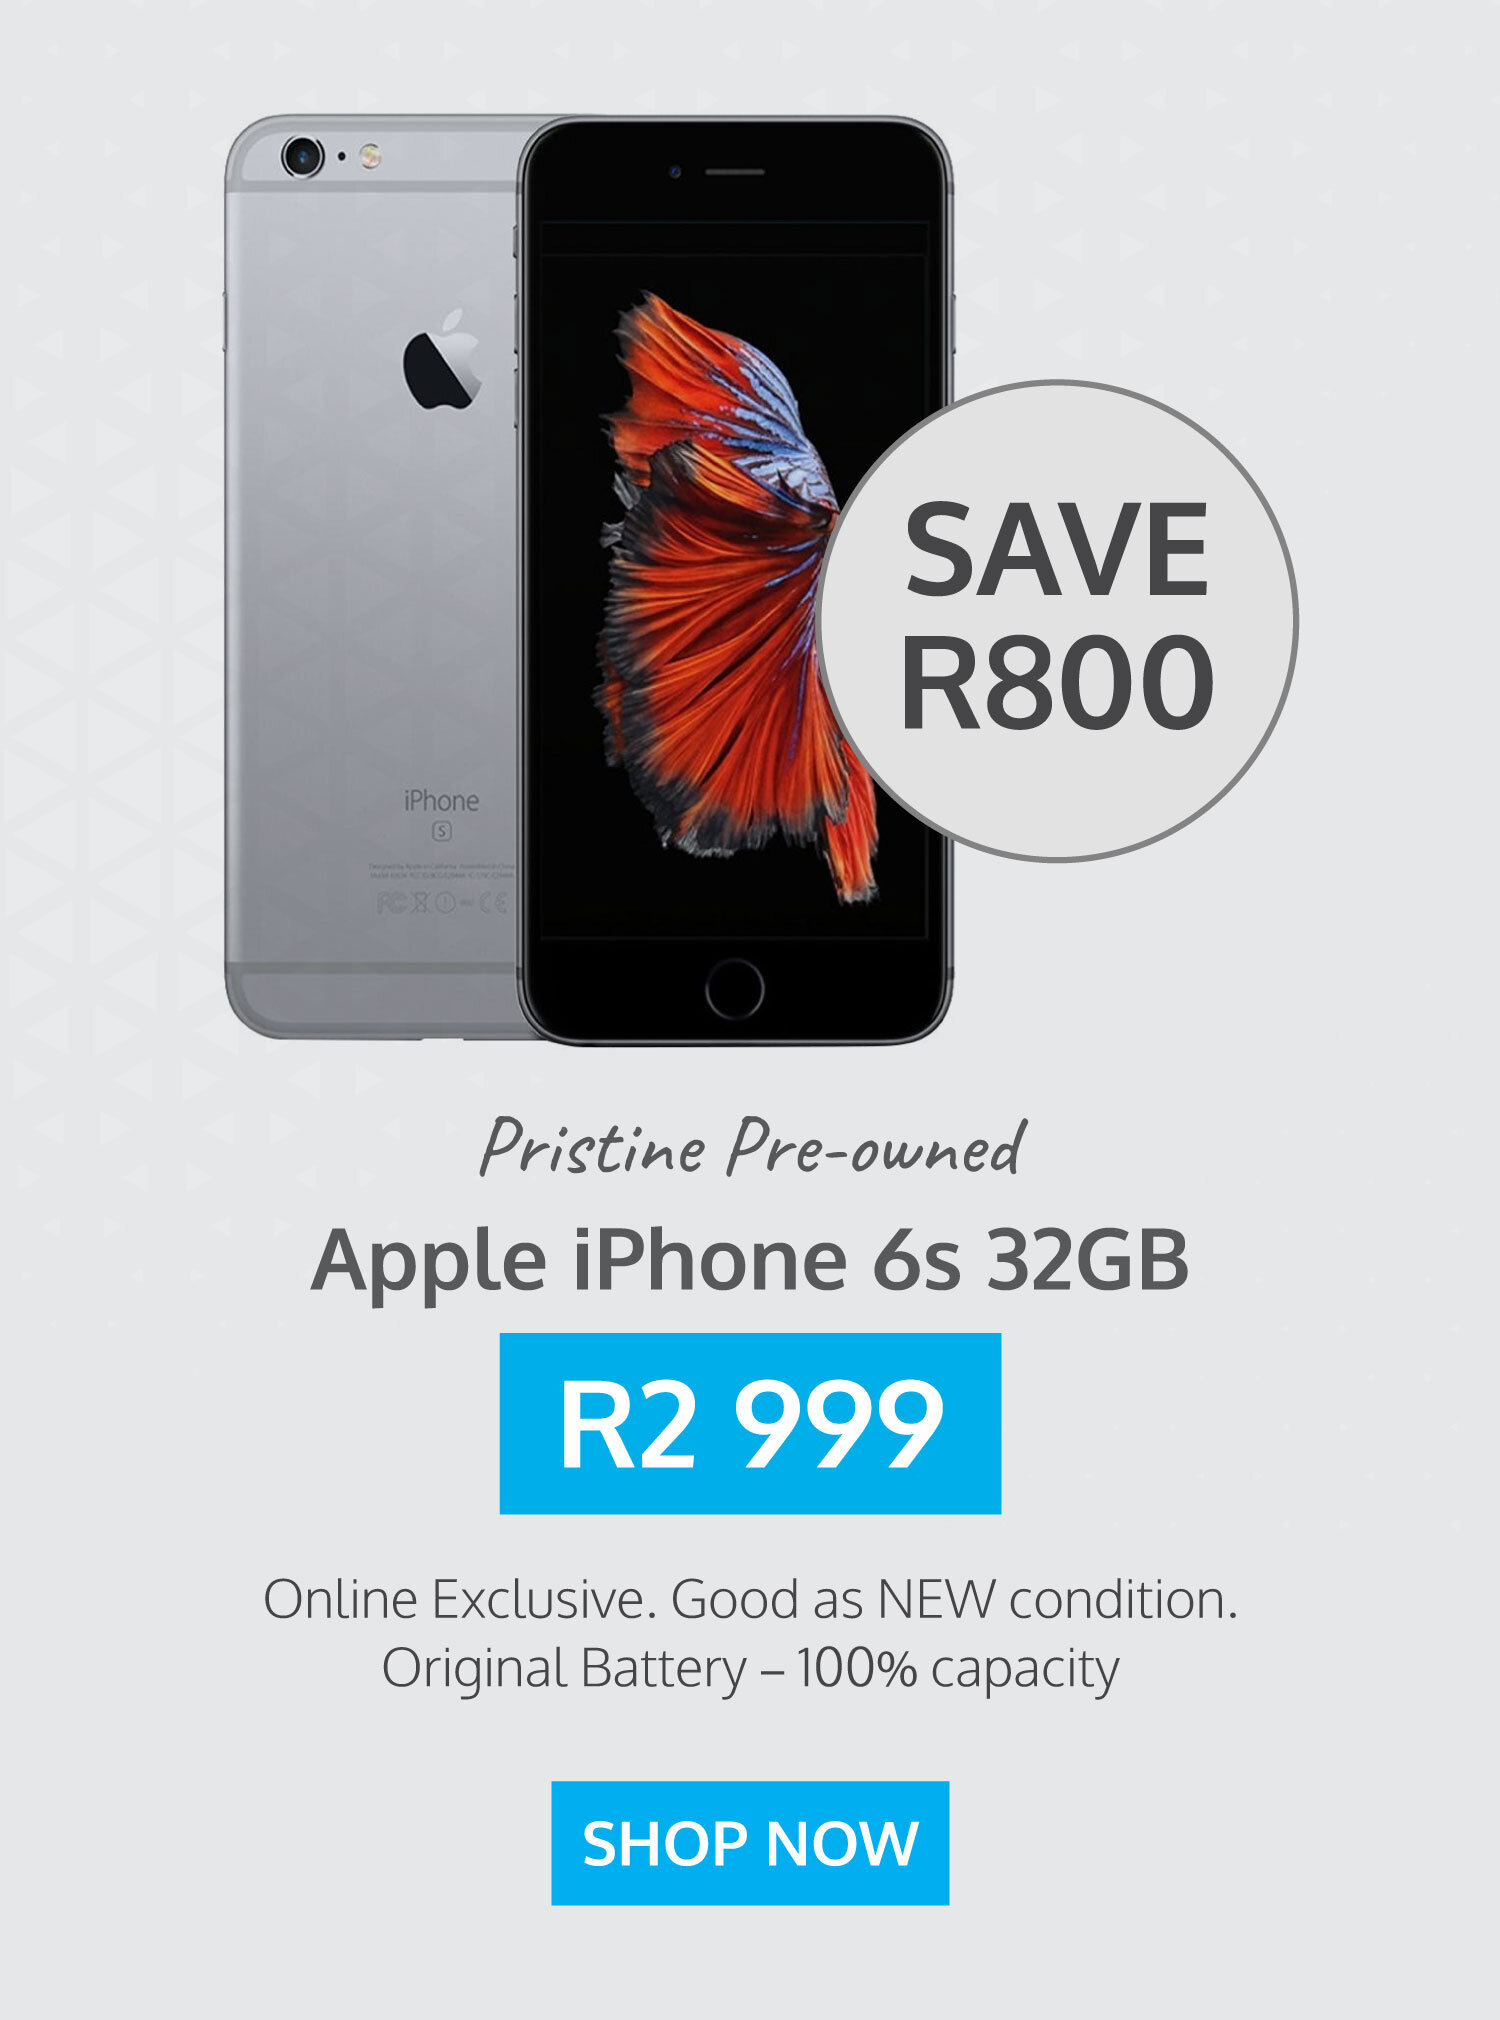 iphone 6s 32gb hero deal - mobile banner